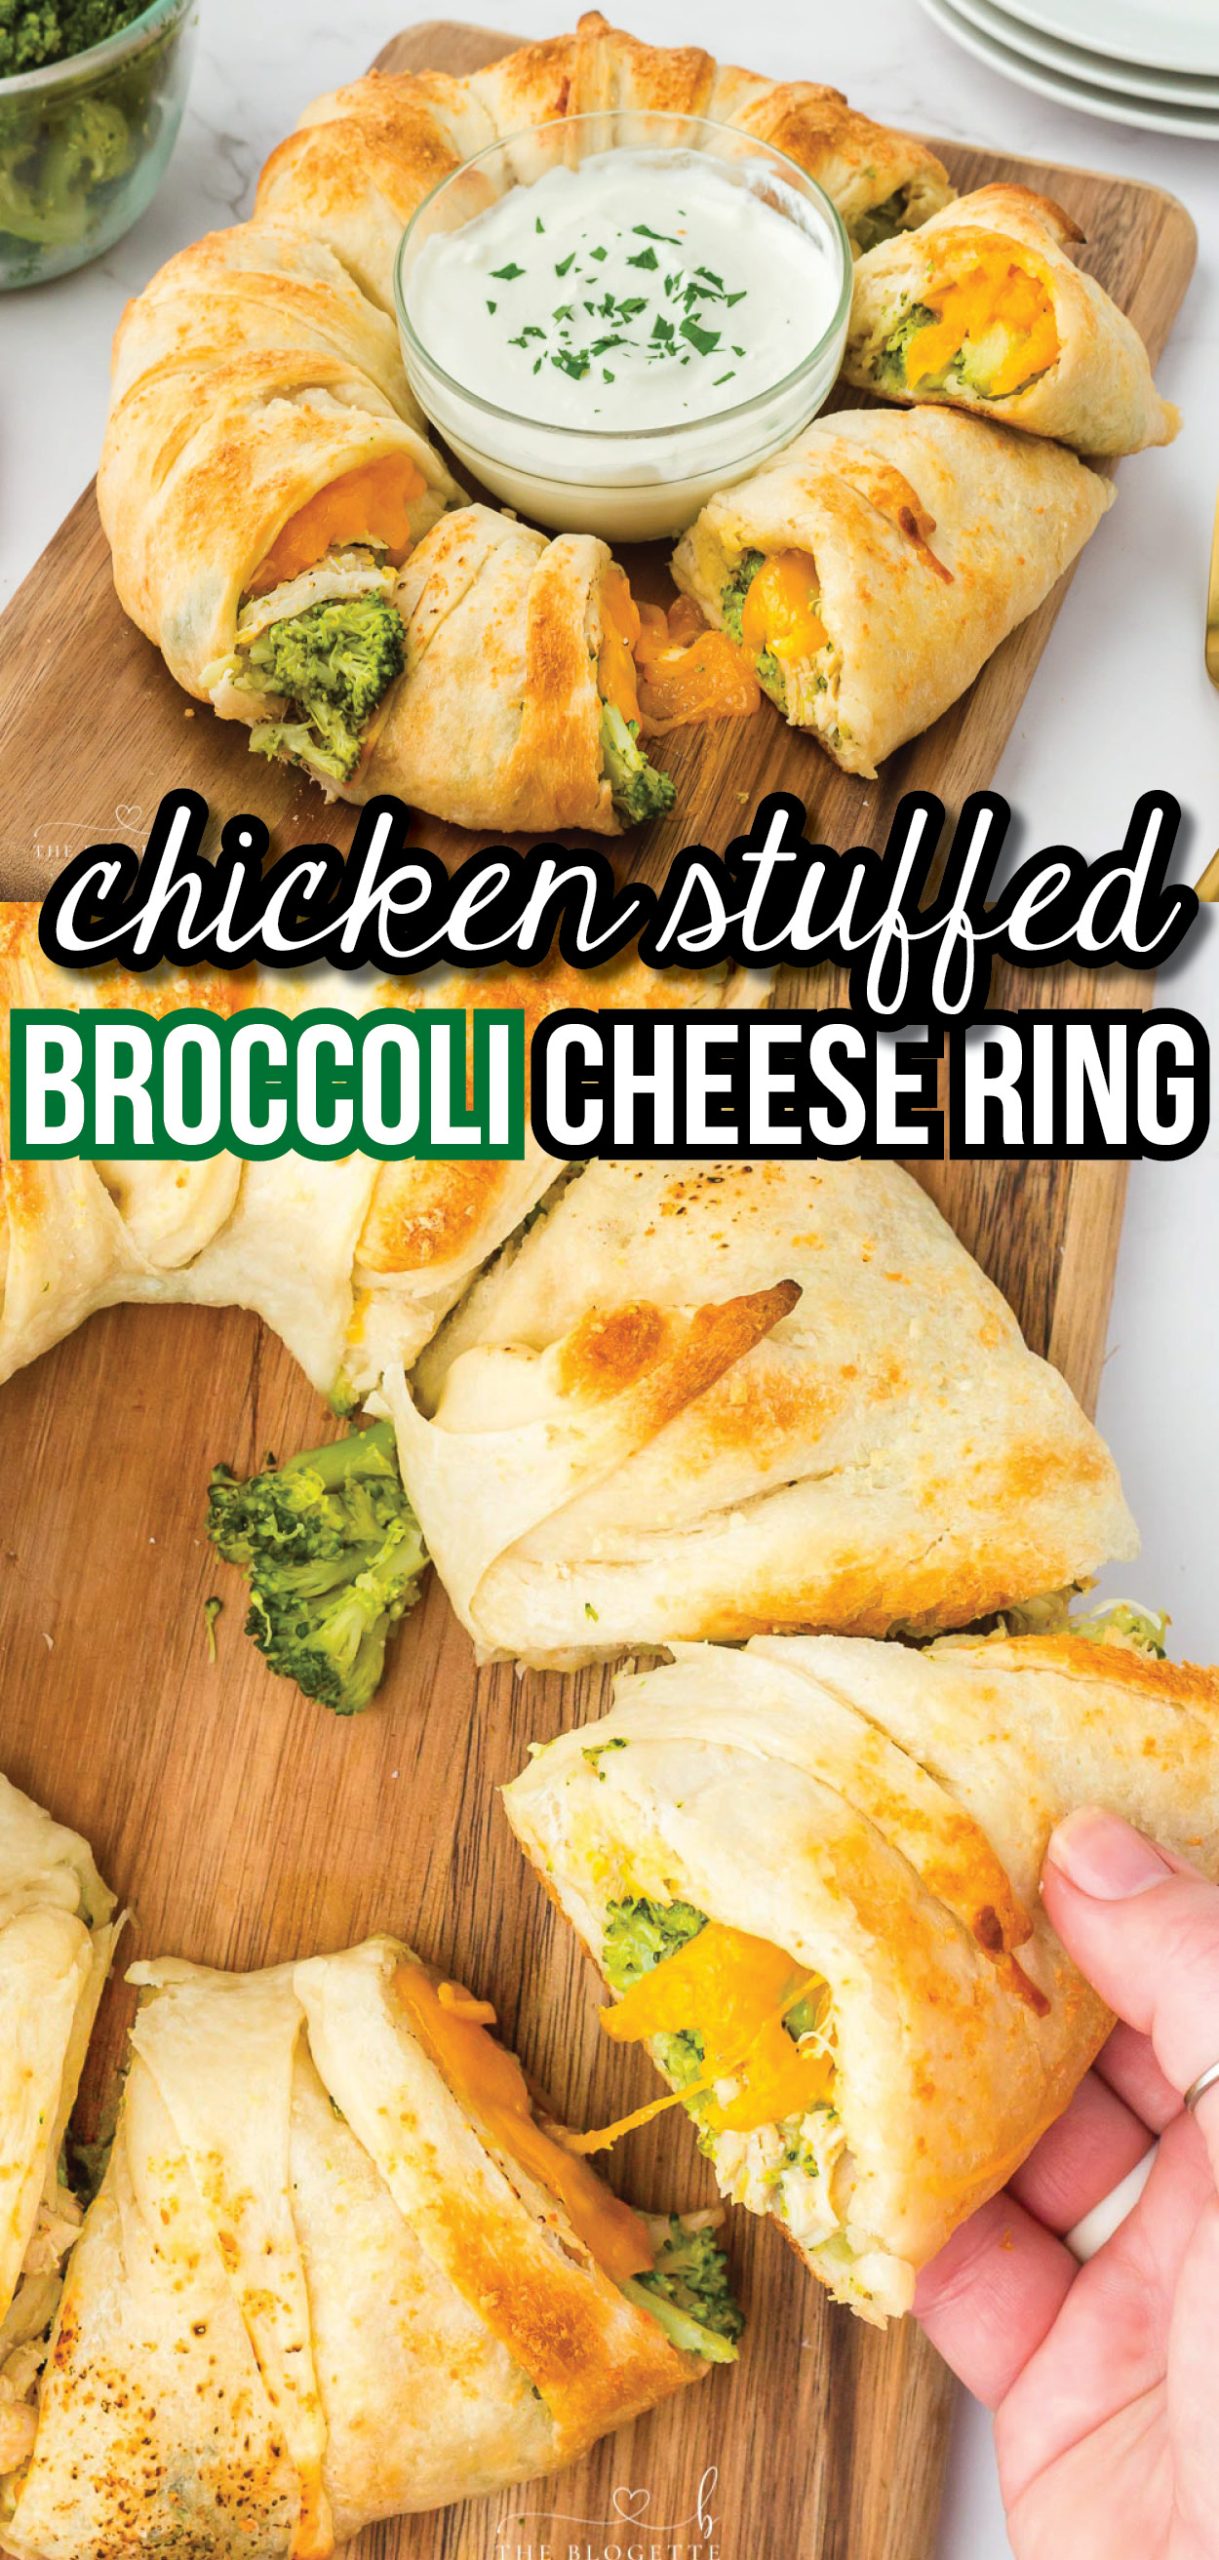 Cheesy Chicken Stuffed Broccoli Ring - It can be served as an appetizer, a lunch, a dinner, or a potluck. Store-bought pizza dough is stuffed with a cheesy chicken and broccoli filling and baked until golden brown. 